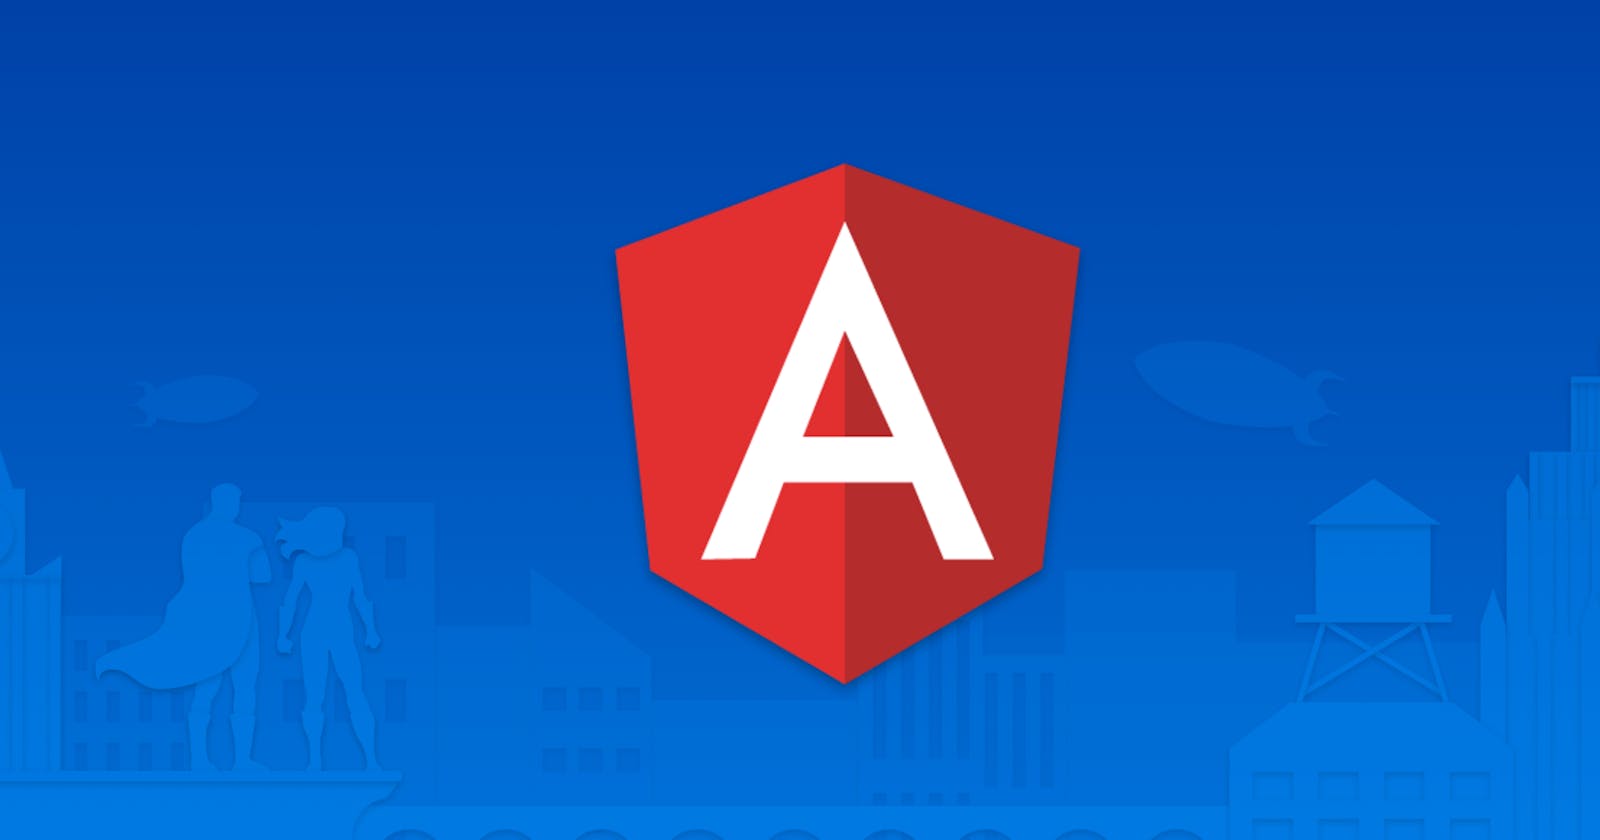 Getting started with Angular 11.